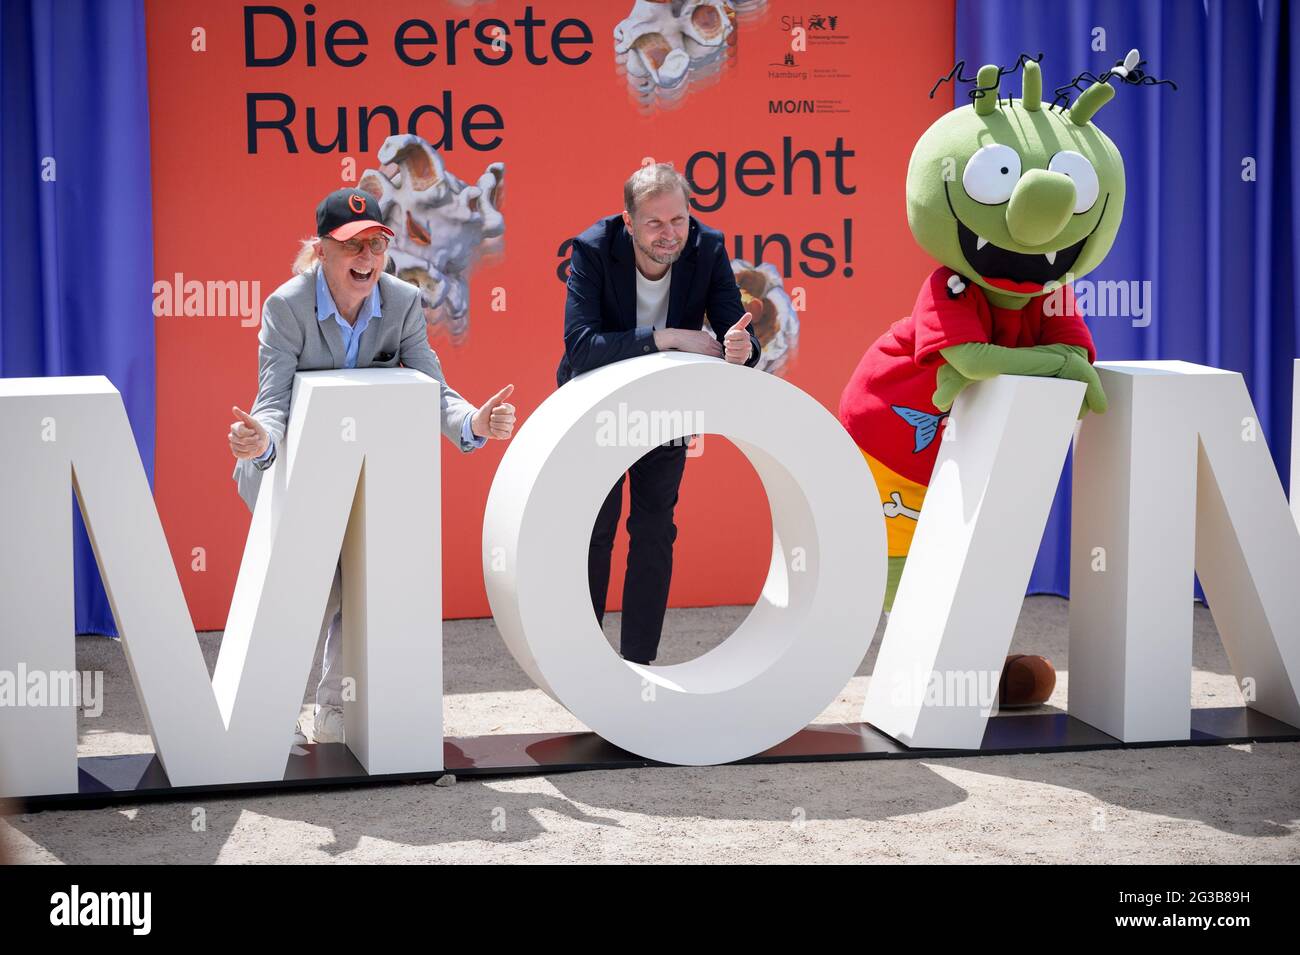 Hamburg, Germany. 15th June, 2021. Otto Waalkes (l-r), comedian, actor and director, gestures with Helge Albers, film producer and Managing Director of Moin Filmförderung Hamburg Schleswig-Holstein GmbH, and a character from the animated film 'Die Olchis' behind the lettering 'Moin' at a press event. On the occasion of the nationwide cinema release on 01 July 2021, MOIN Filmförderung Hamburg Schleswig-Holstein is luring viewers back into the halls with free cinema tickets. Credit: Jonas Walzberg/dpa/Alamy Live News Stock Photo